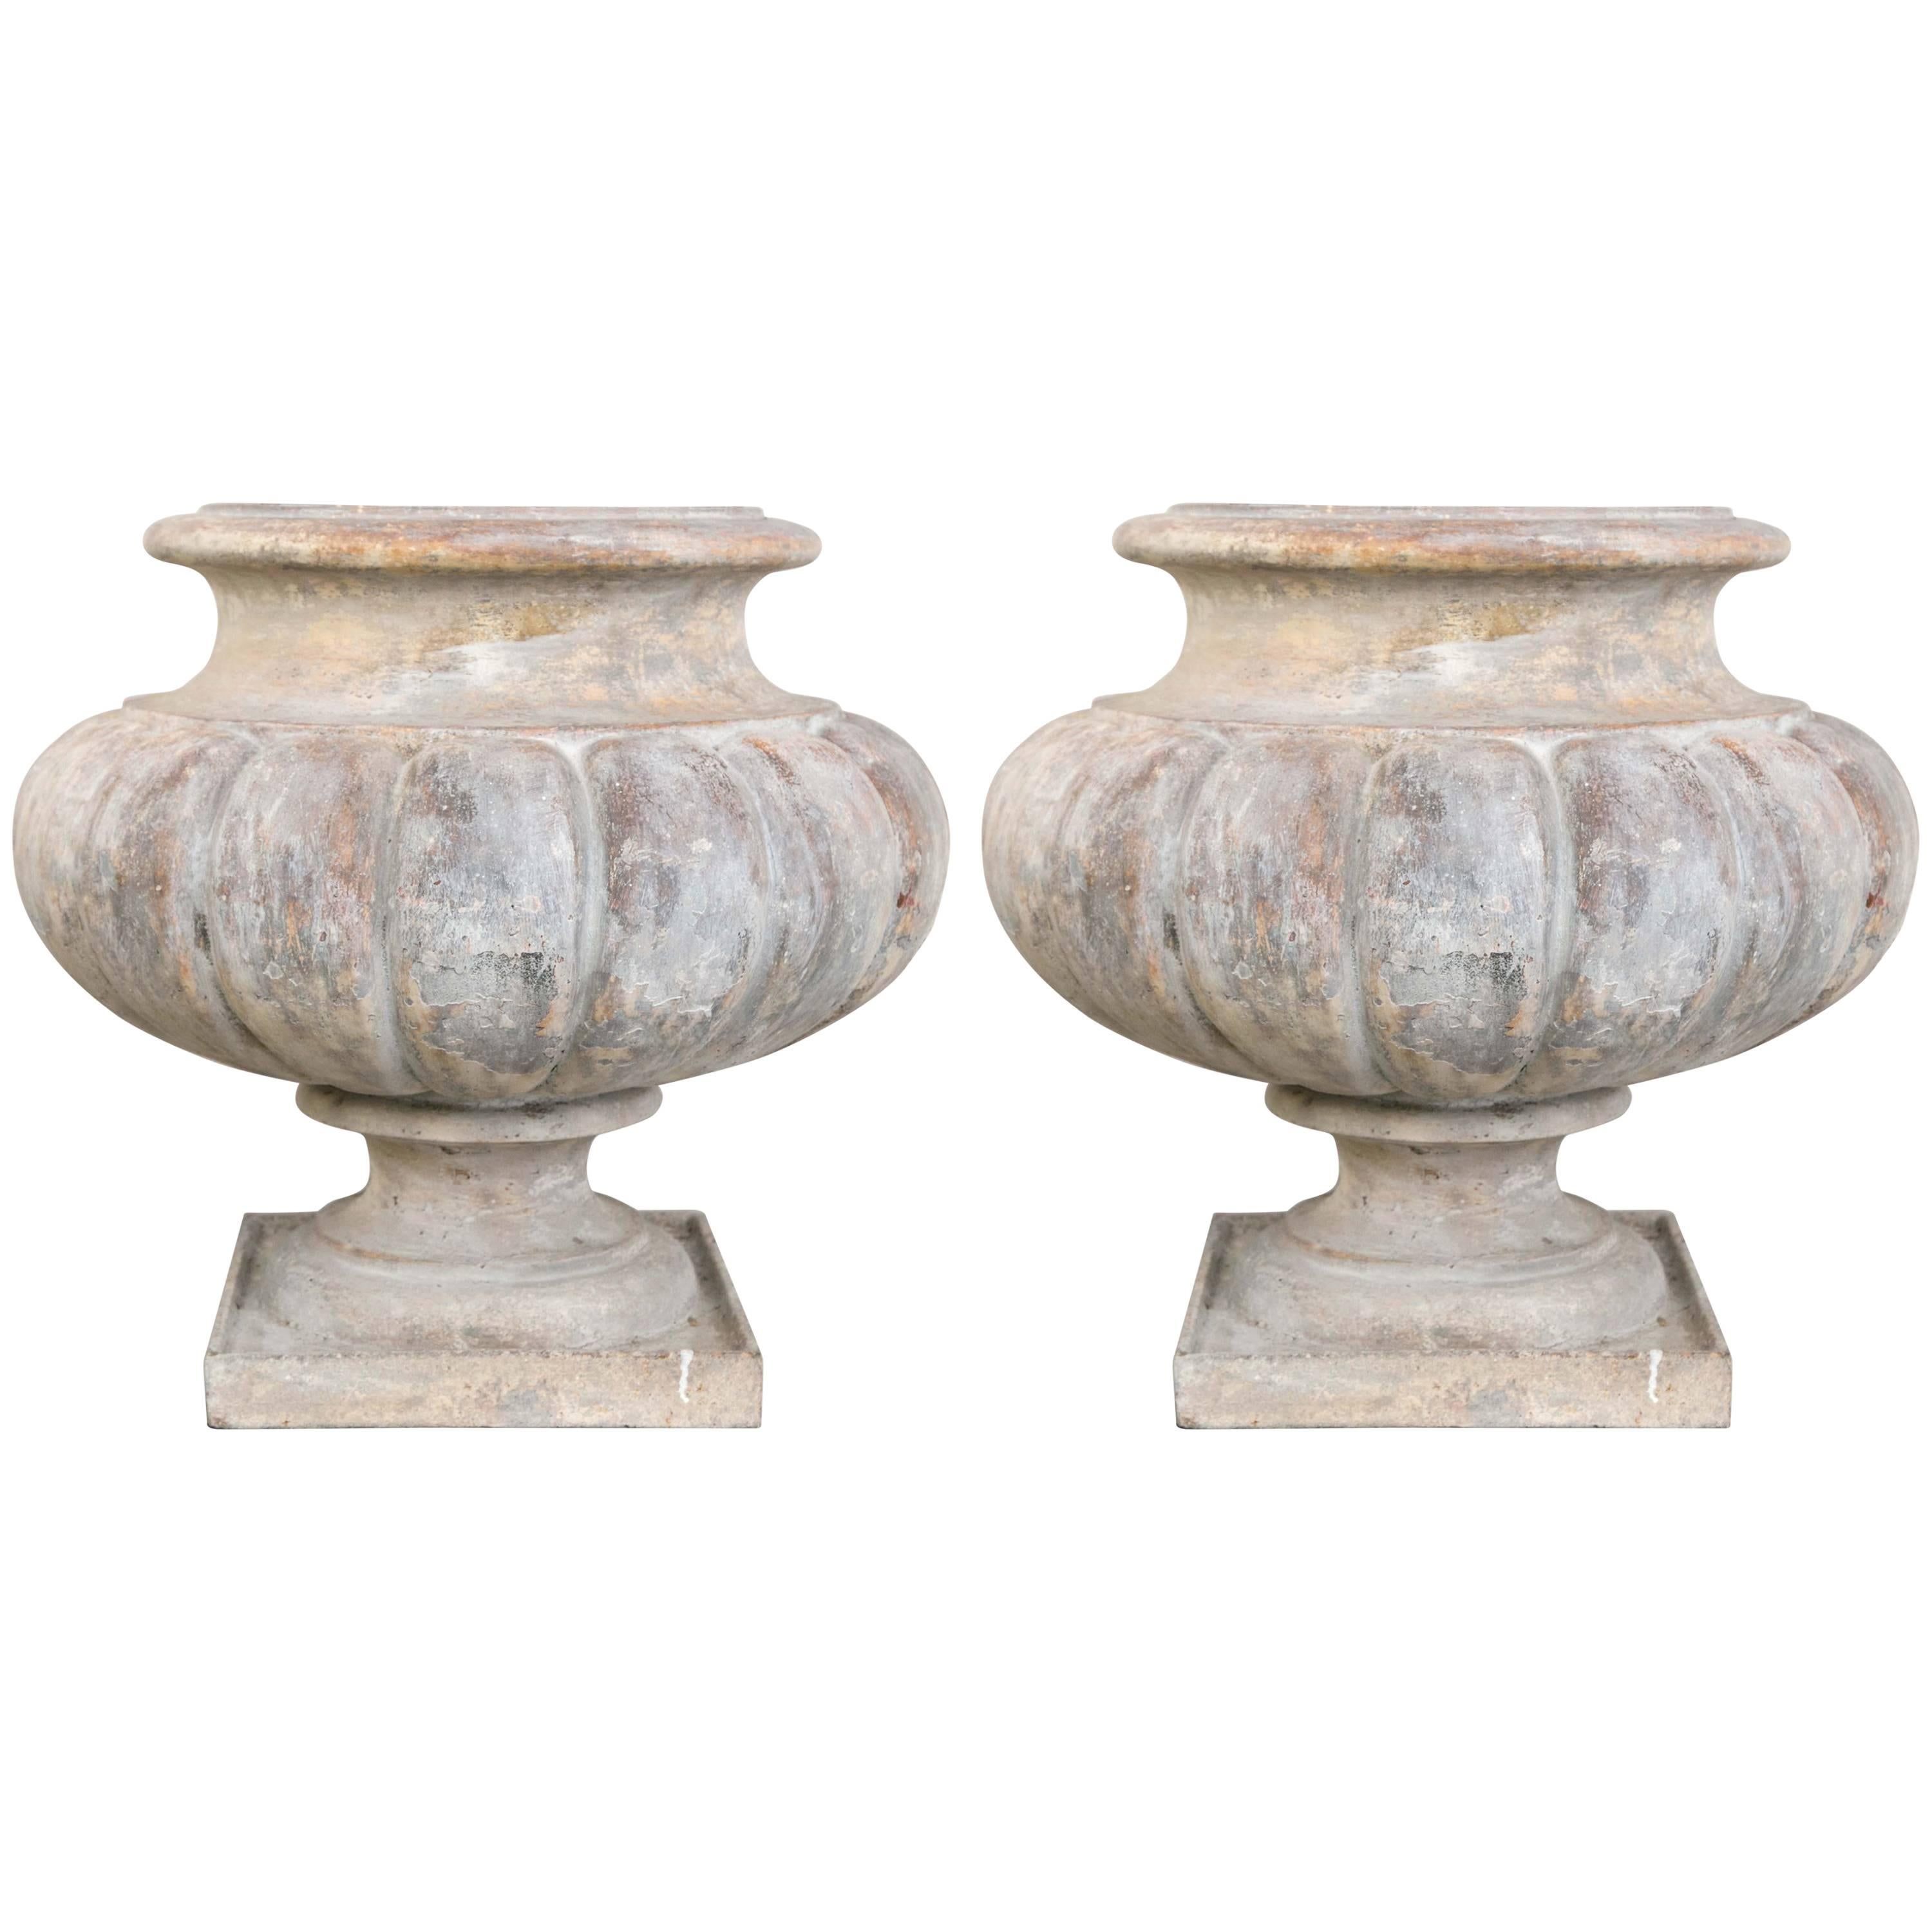 Pair of Cast Iron Melon Shaped Urns For Sale